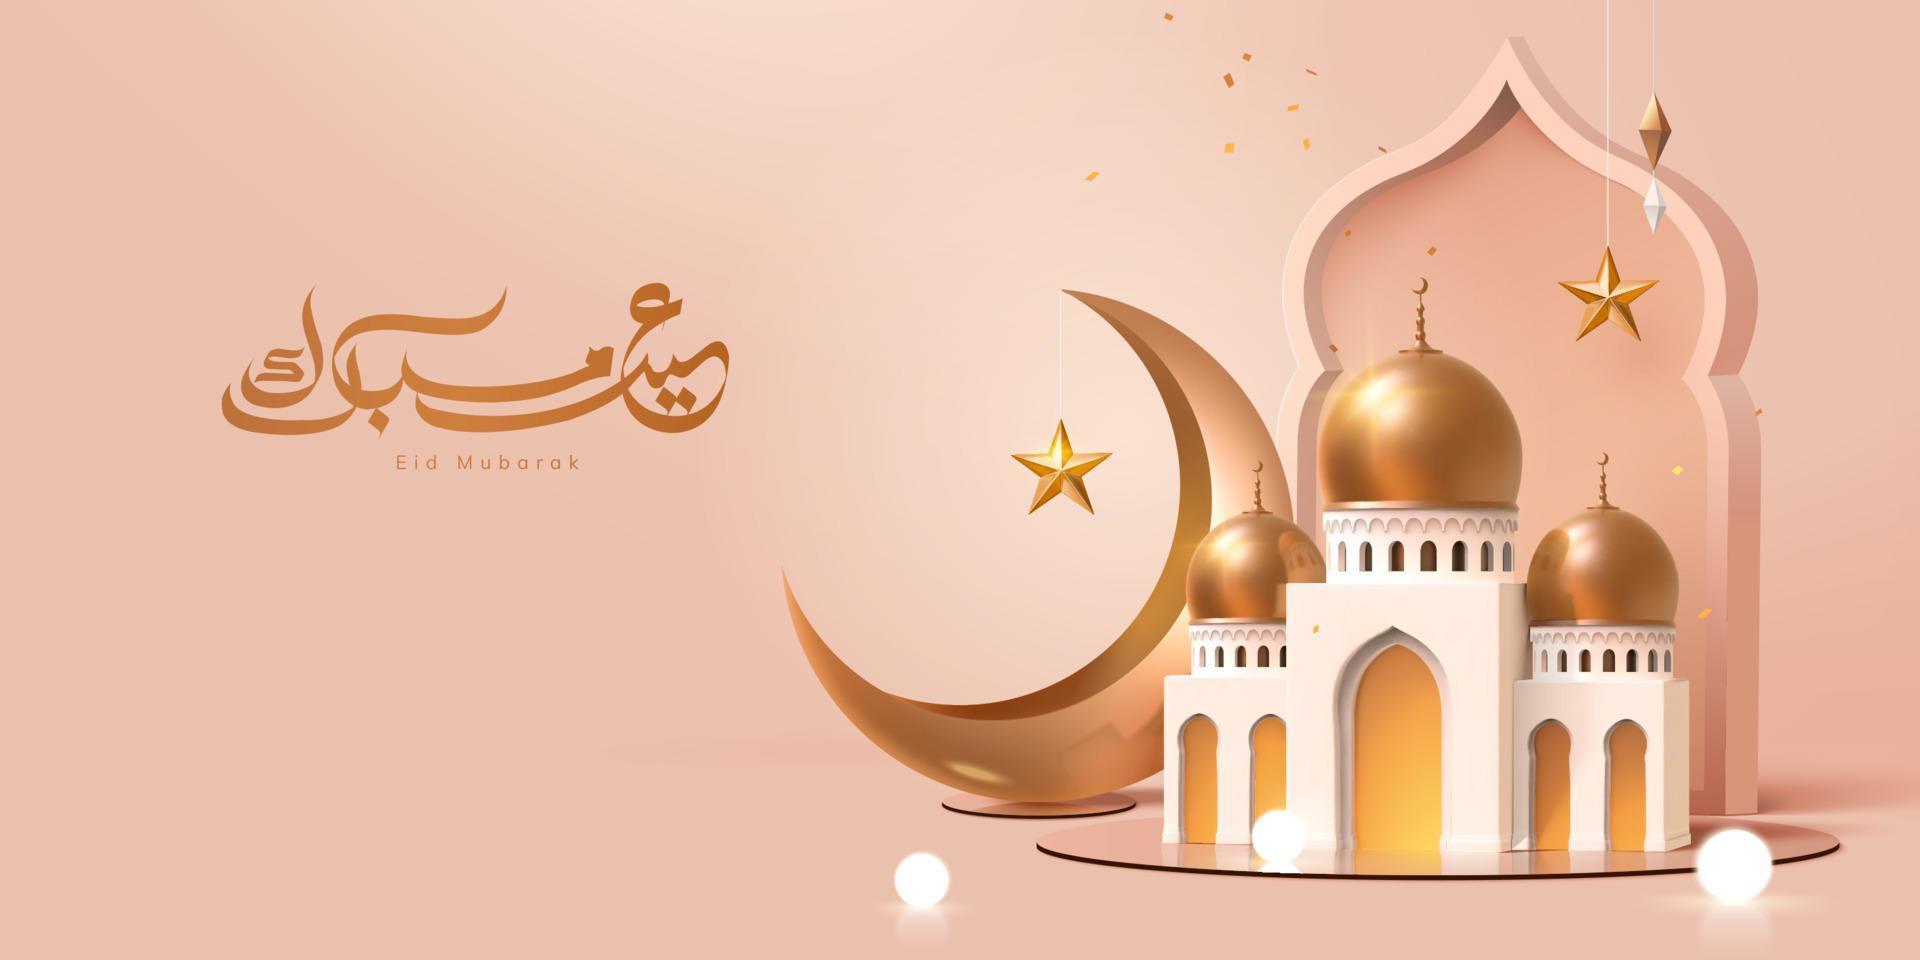 3d modern Islamic holiday banner, suitable for Ramadan, Raya Hari, Eid al Adha. Cute toy mosque and crescent moon displayed on round mirror with onion dome in the background. vector